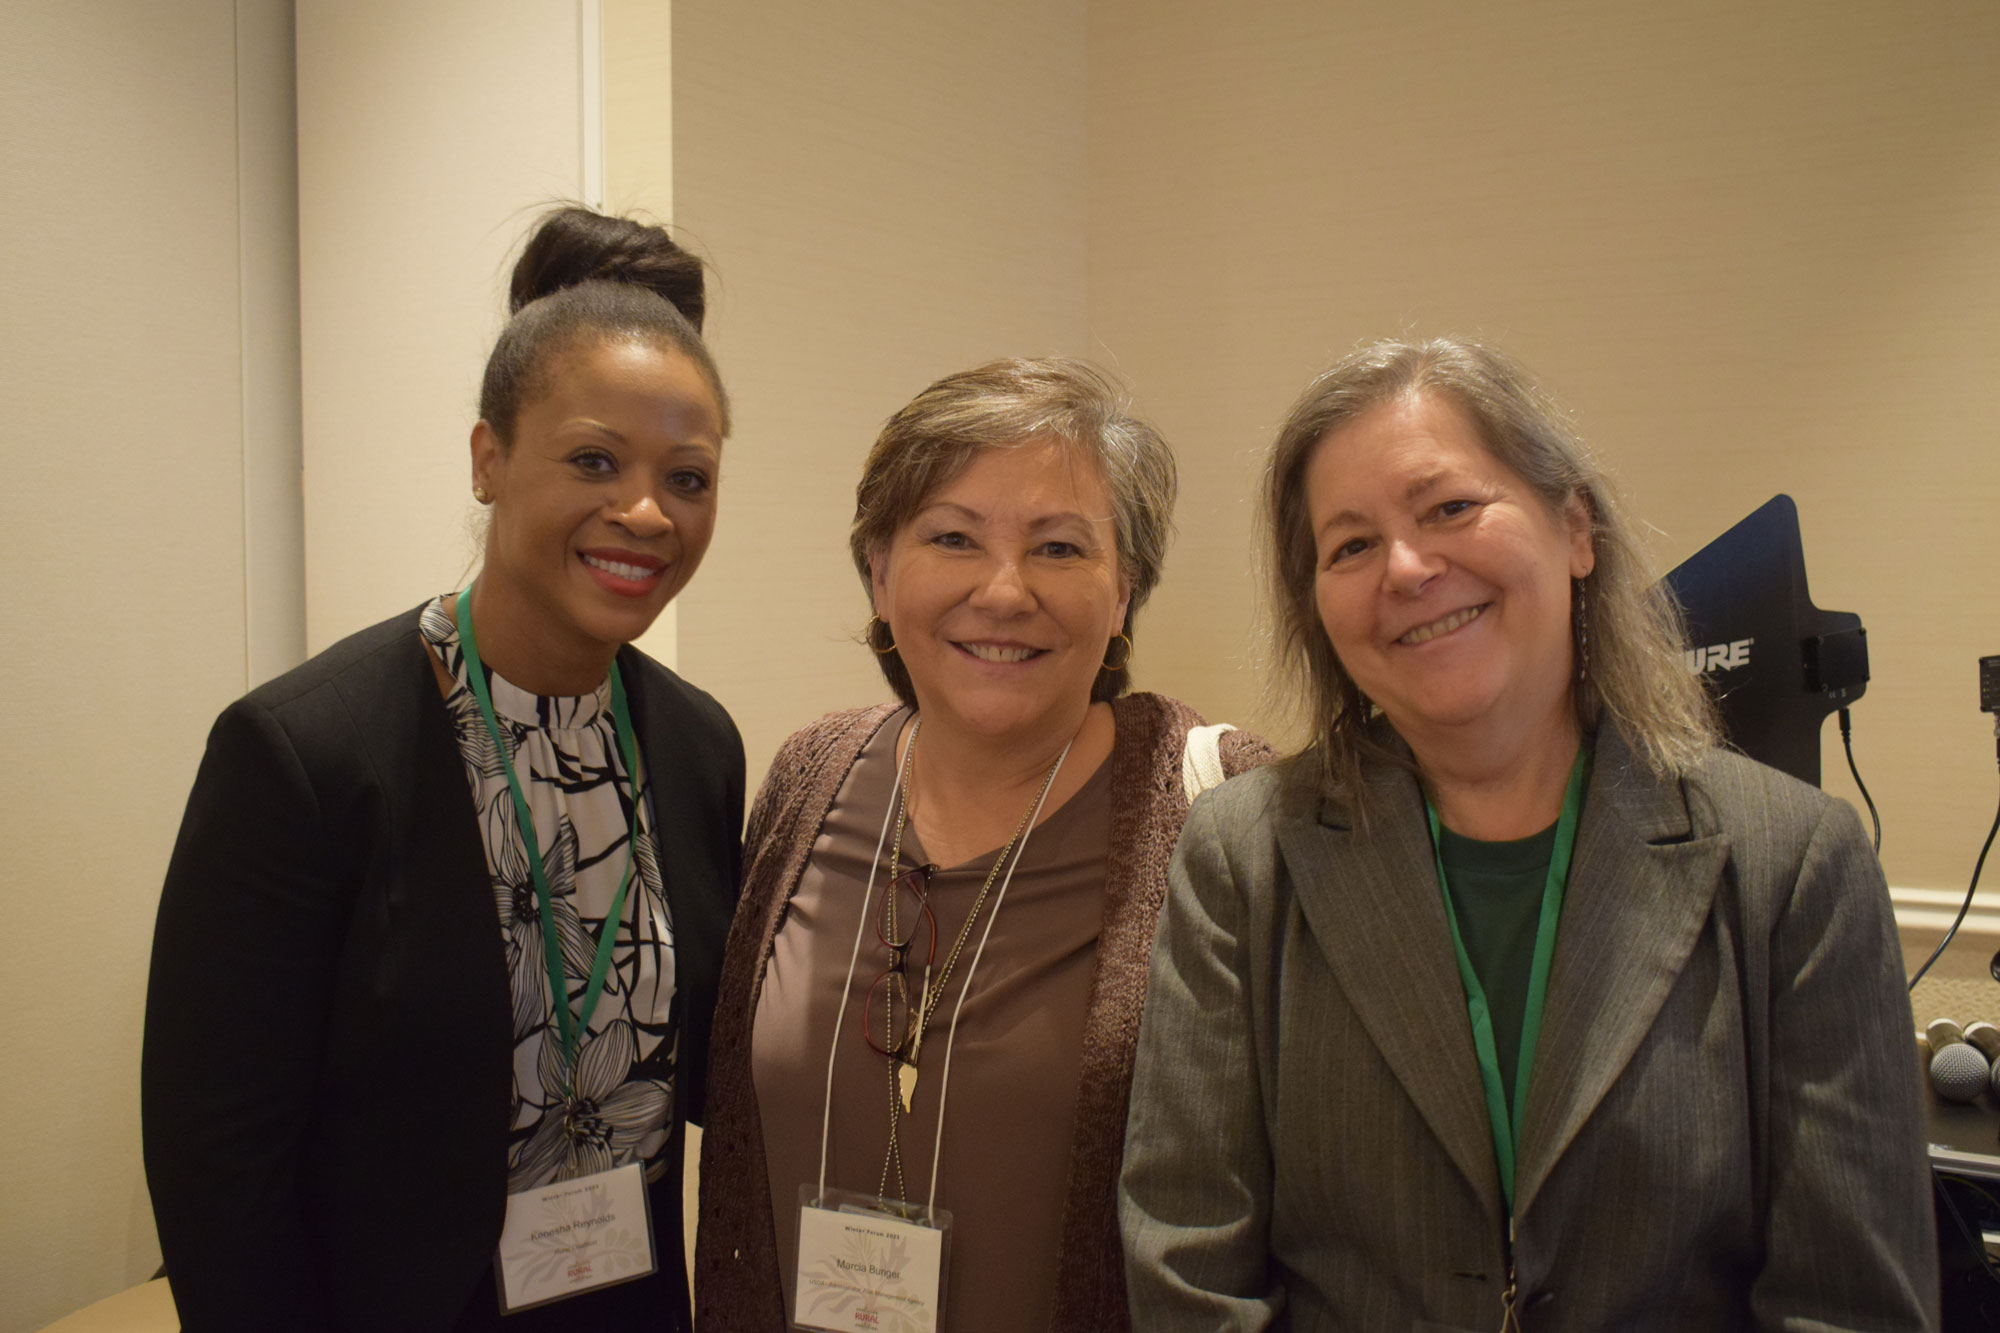 RMA Administrator Marcia Bunger with the Rural Coalition’s Technical Assistance Specialist Kenesha Reynolds (L), and Executive Director Lorette Picciano (R), Washington, D.C., January 18, 2023